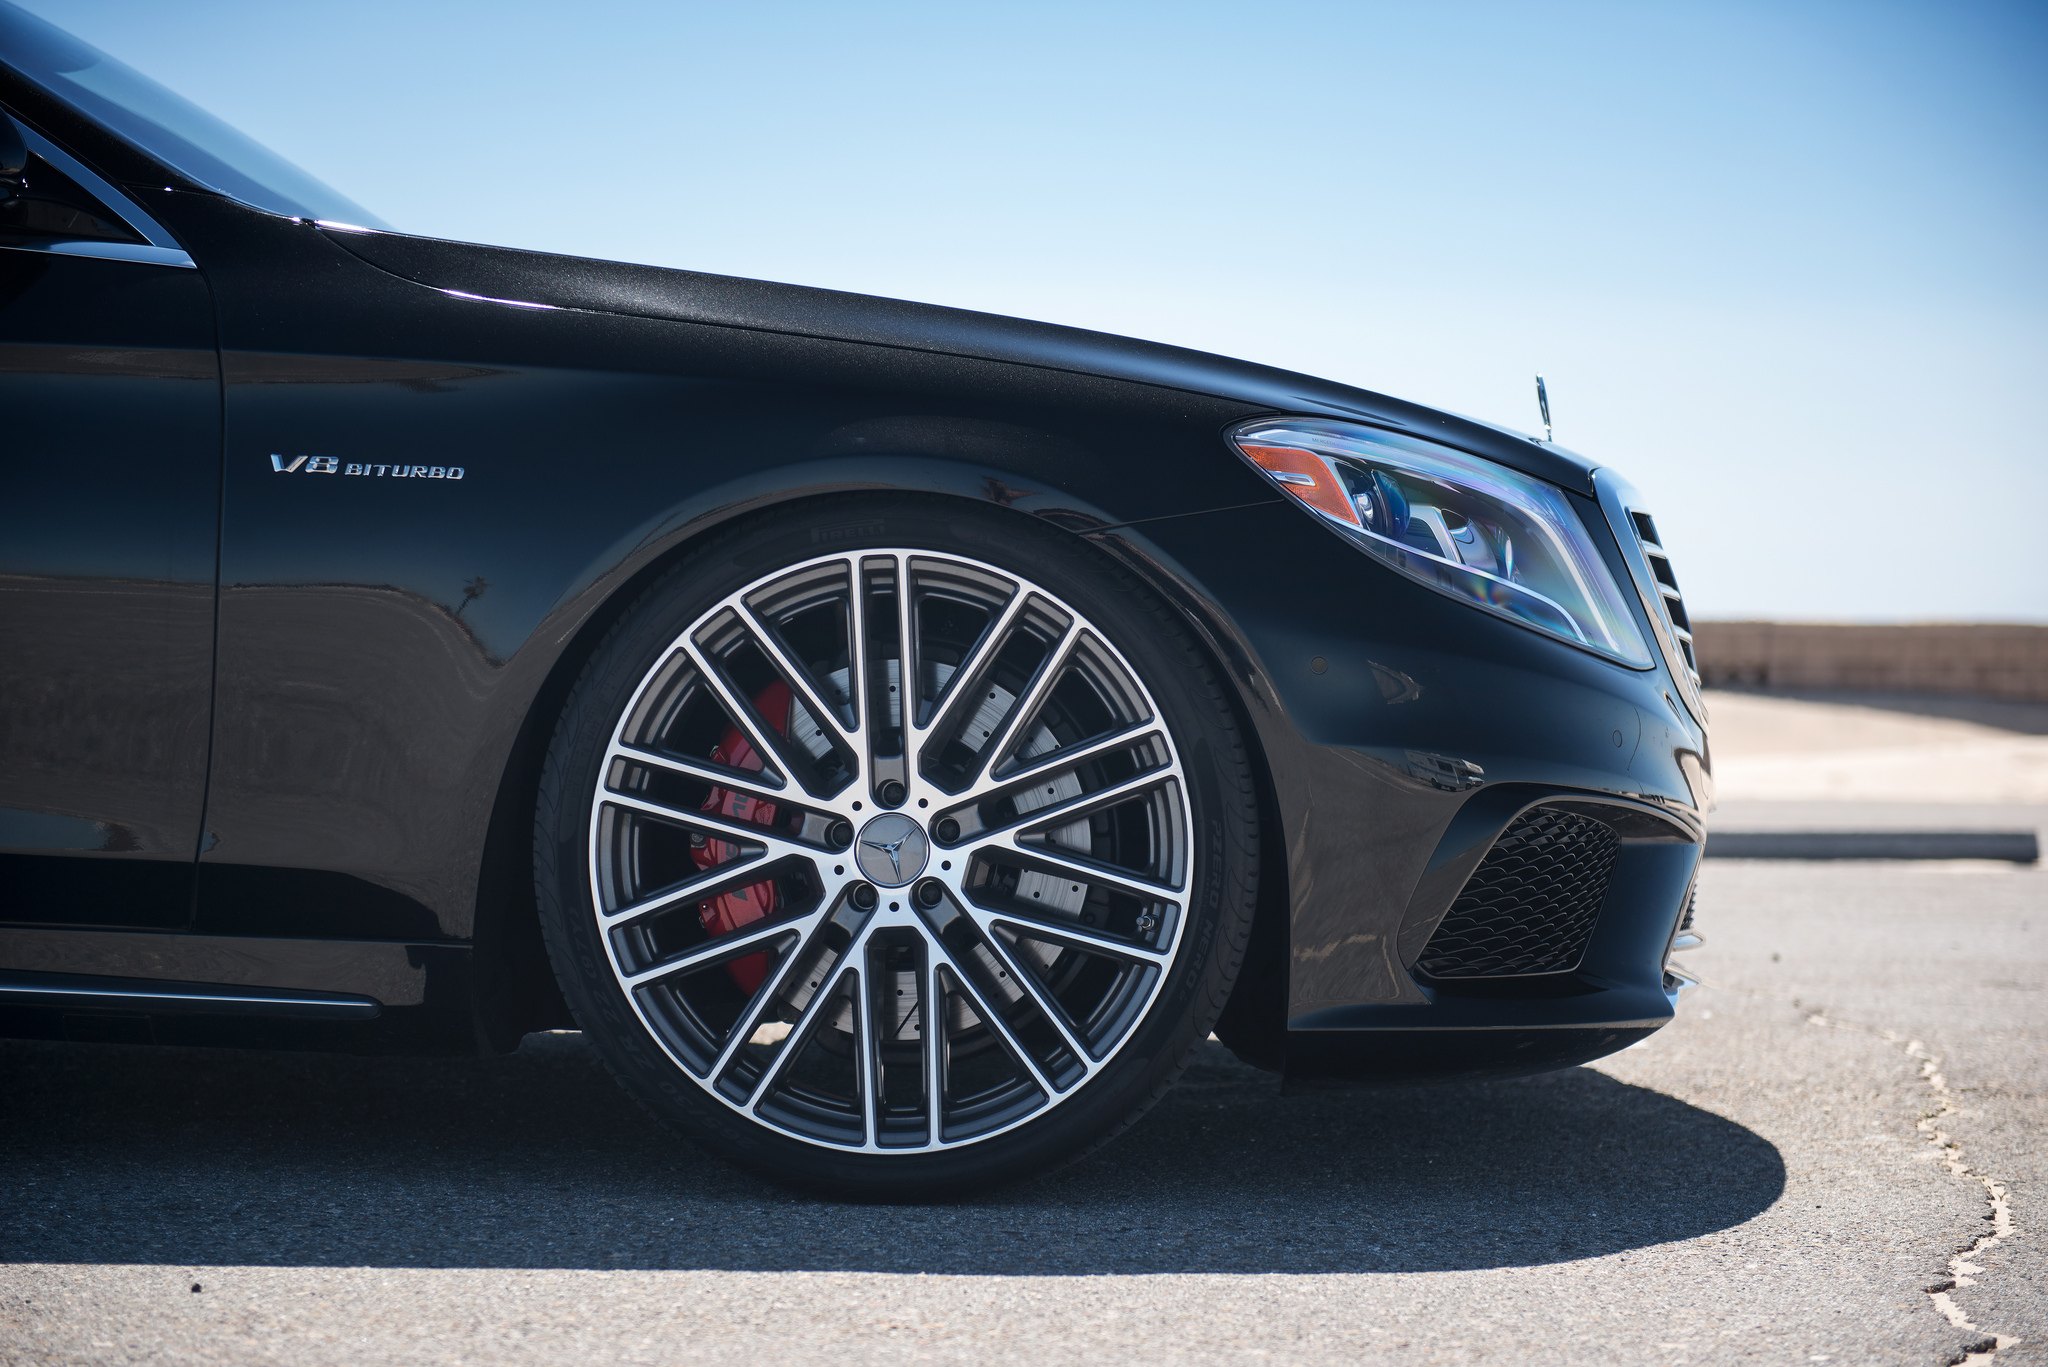 Mandrus Rims with Red Brakes on Black Mercedes S Class - Photo by Mandrus Wheels